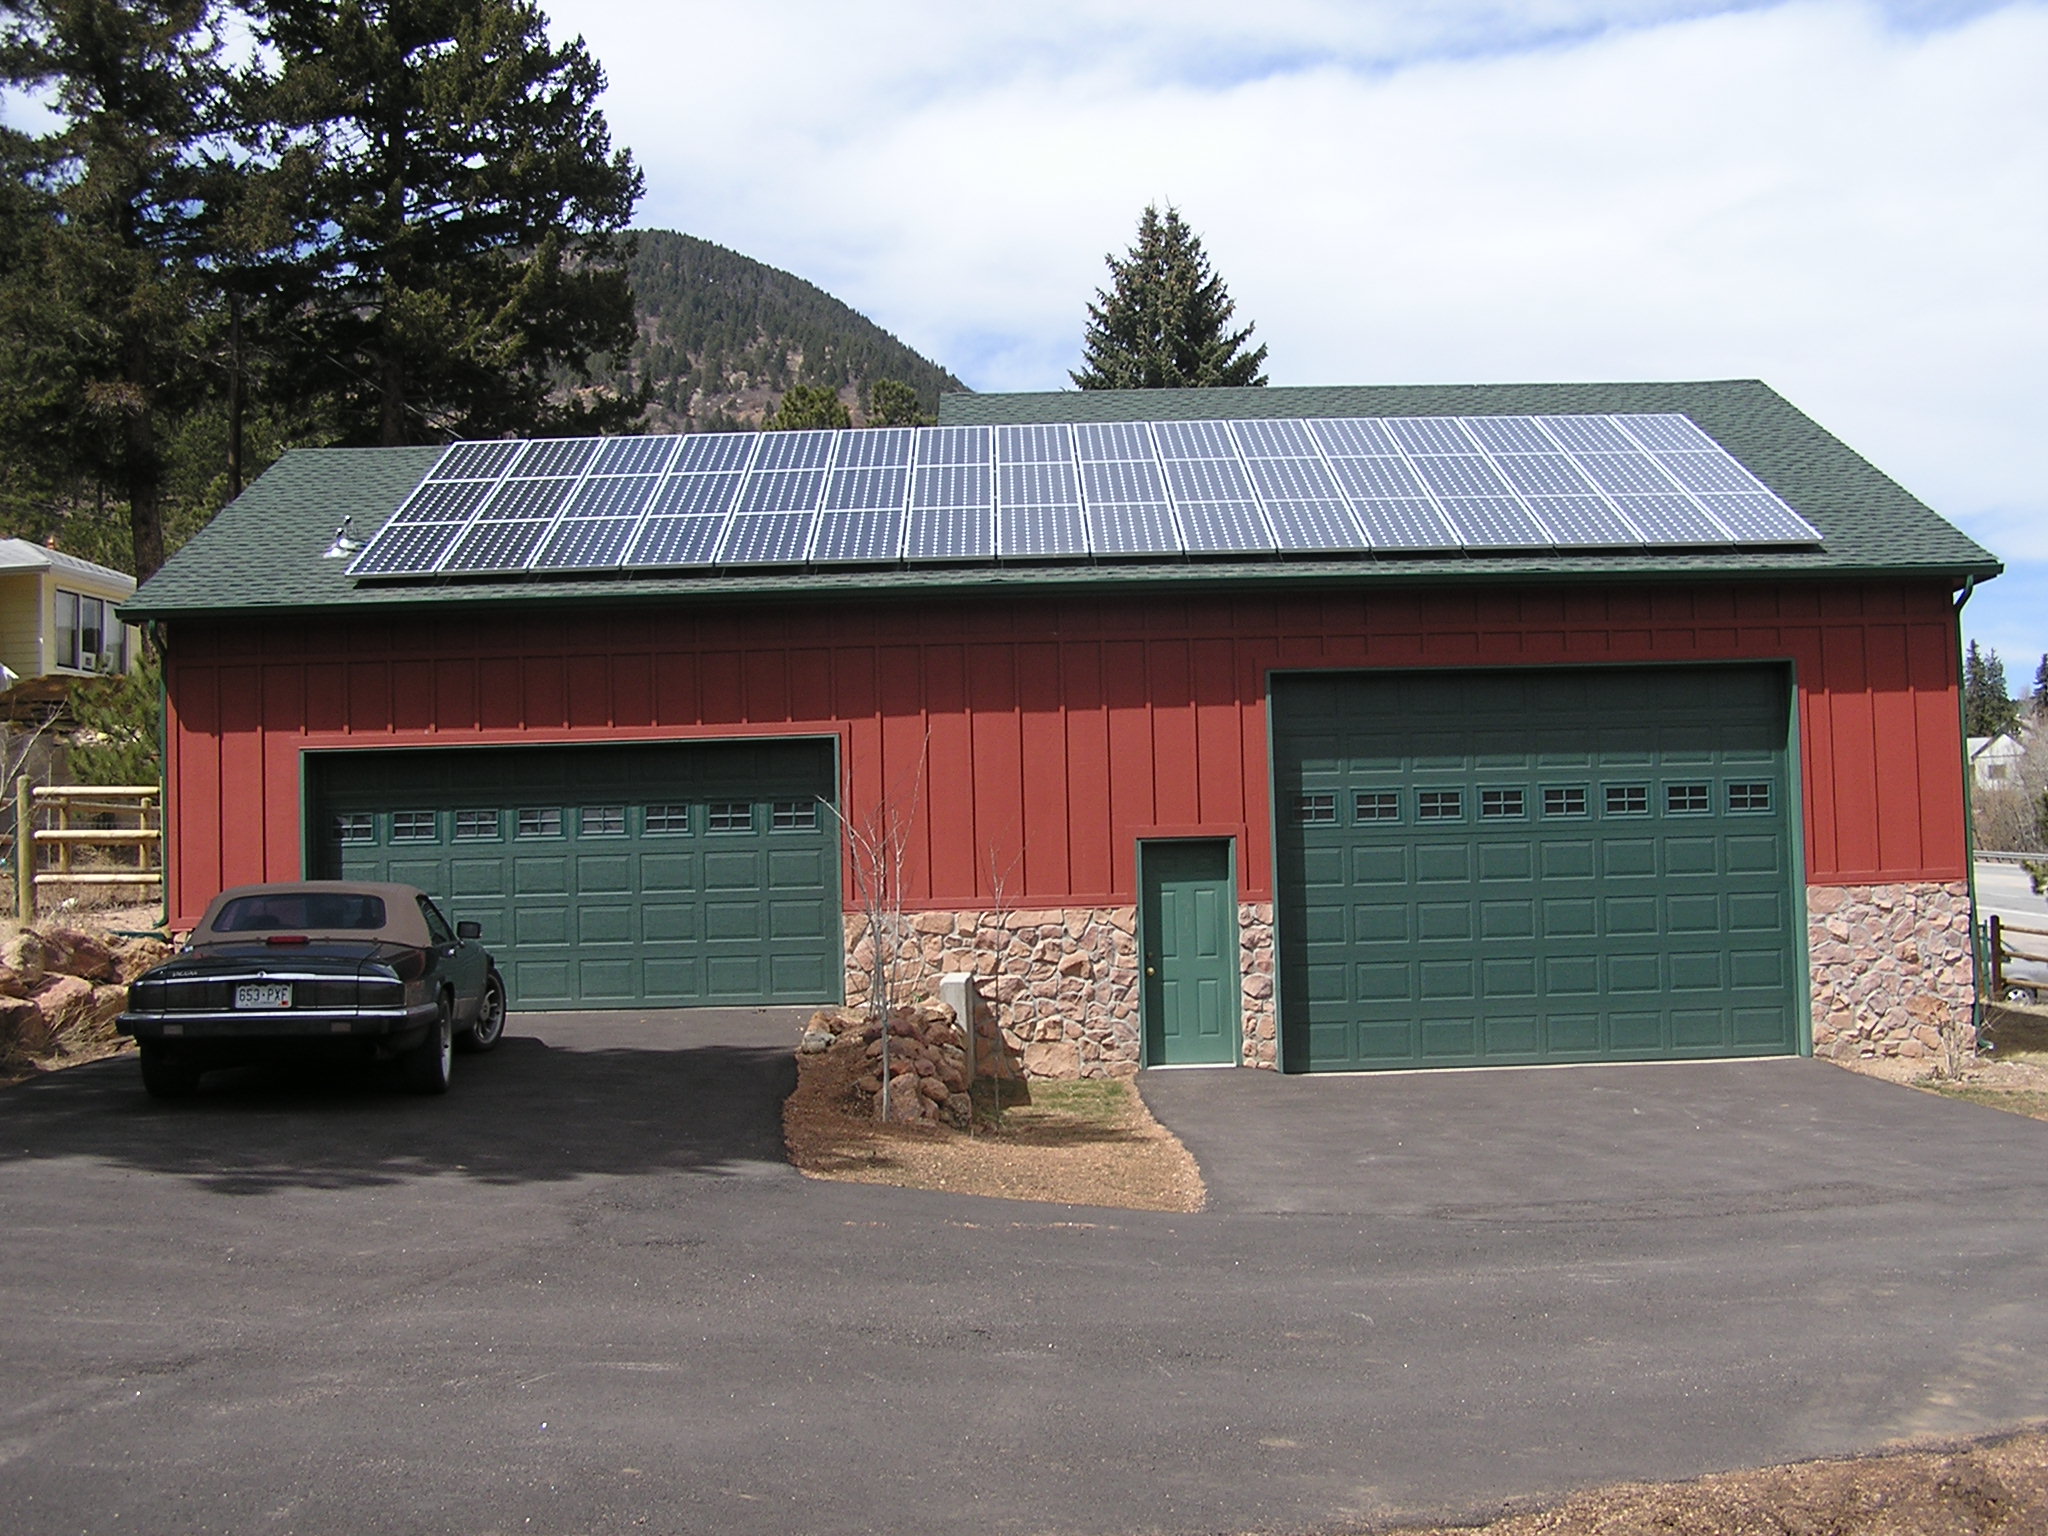 colorado-springs-utilities-announces-new-partnerships-with-two-solar